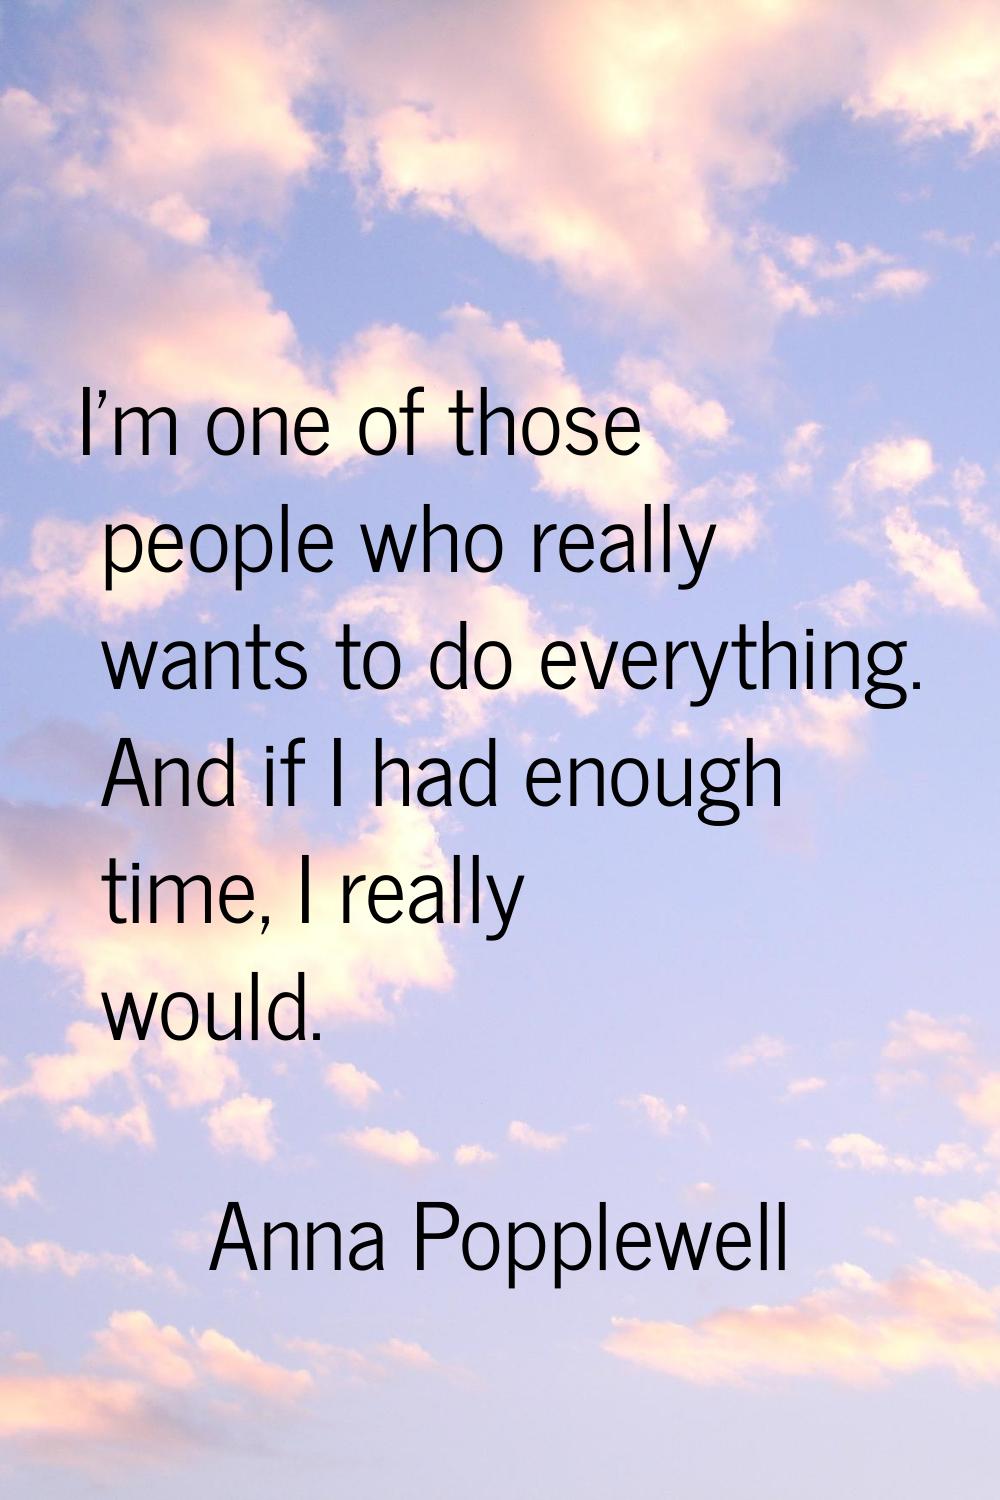 I'm one of those people who really wants to do everything. And if I had enough time, I really would